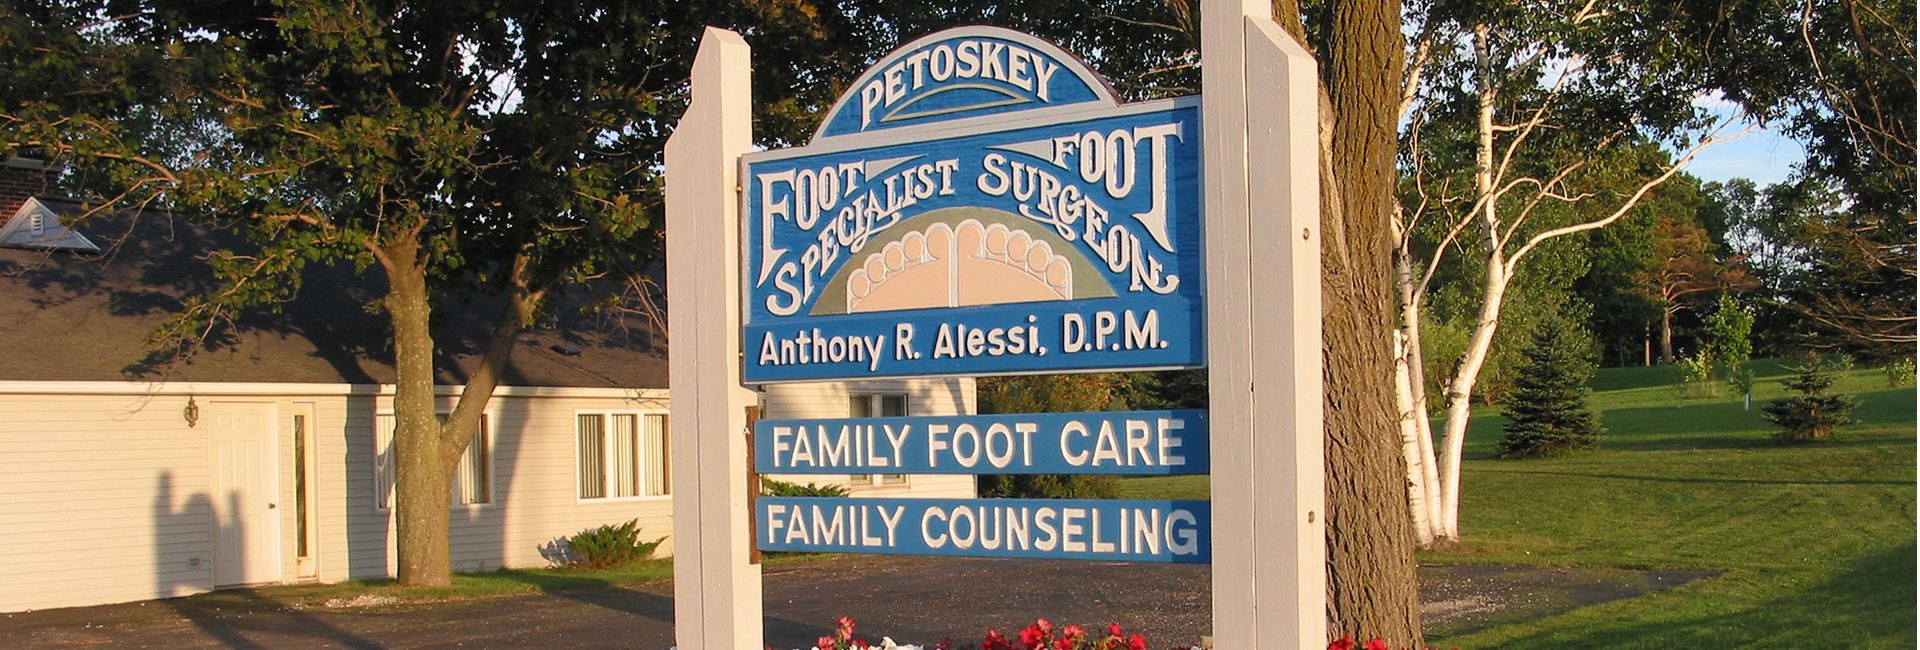 Petoskey Family Foot Care